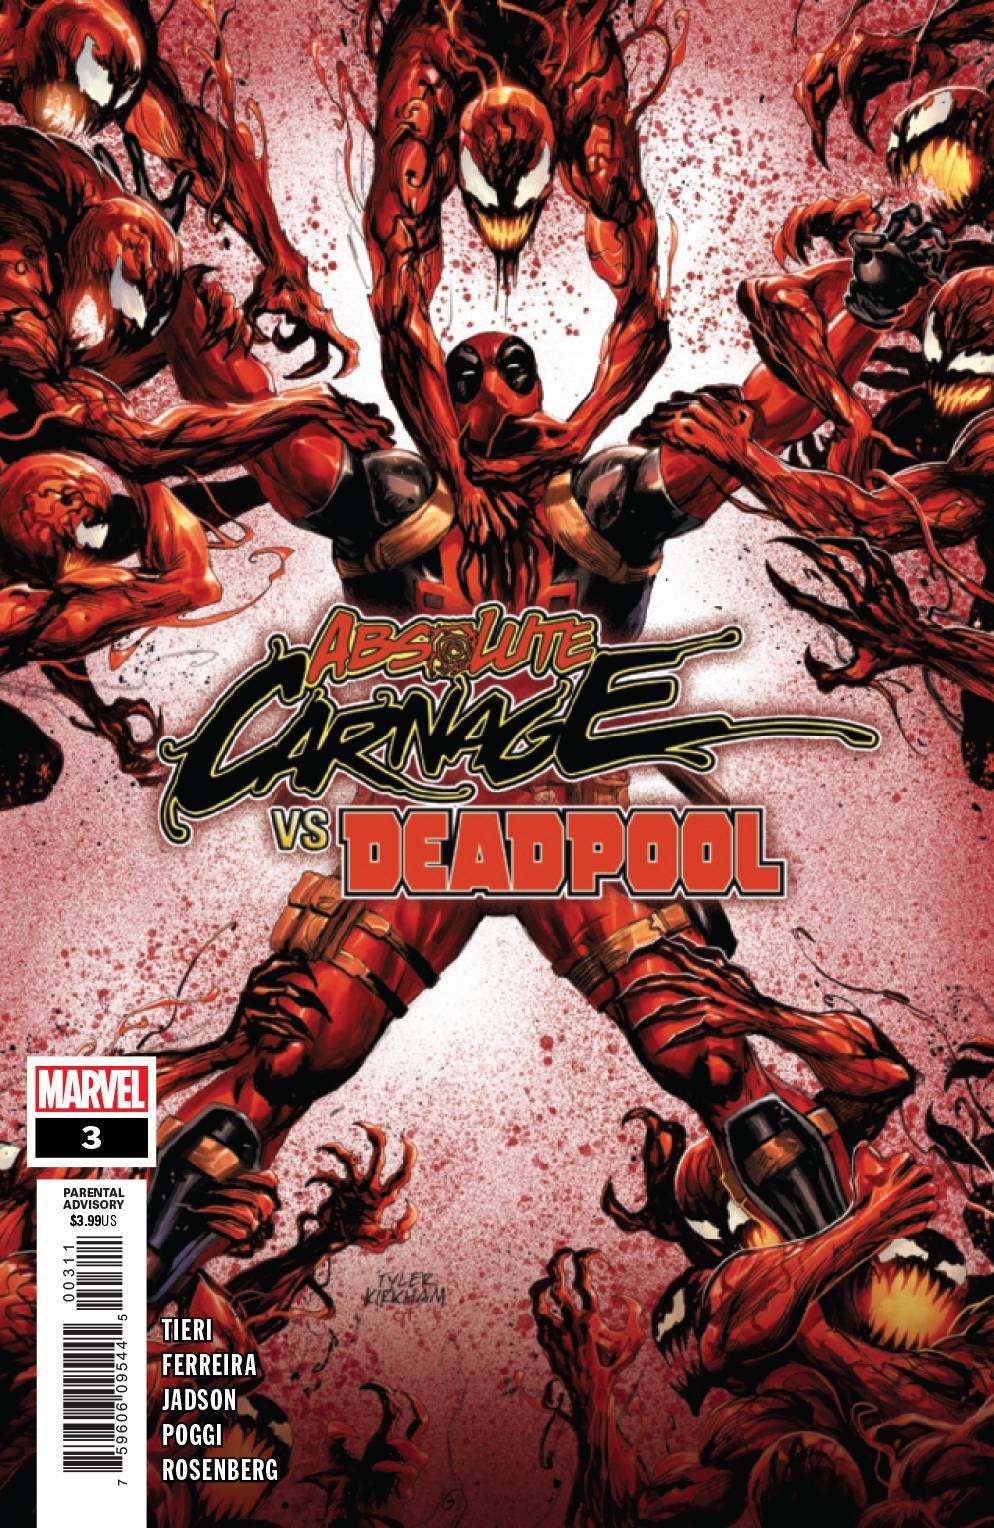 Absolute Carnage VS Deadpool #3 (OF 3) AC King Gaming